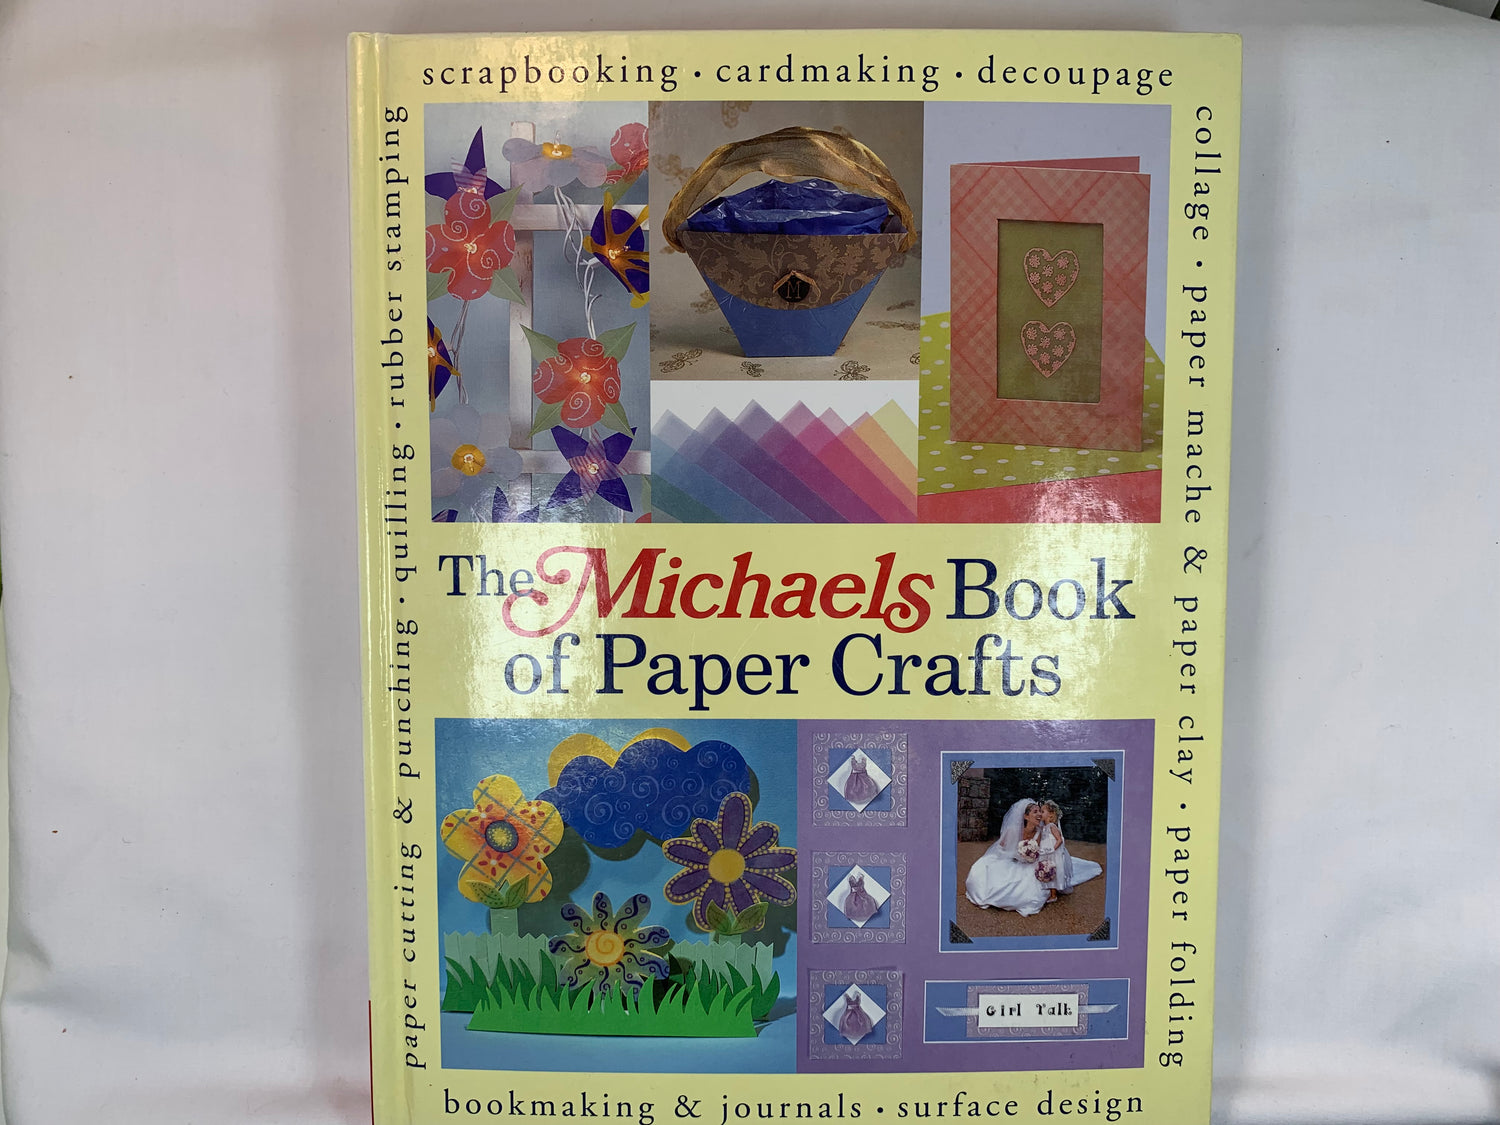 THE MICHAELS BOOK OF ARTS & CRAFTS PAINTING SCRAPBOOK CARD MAKING